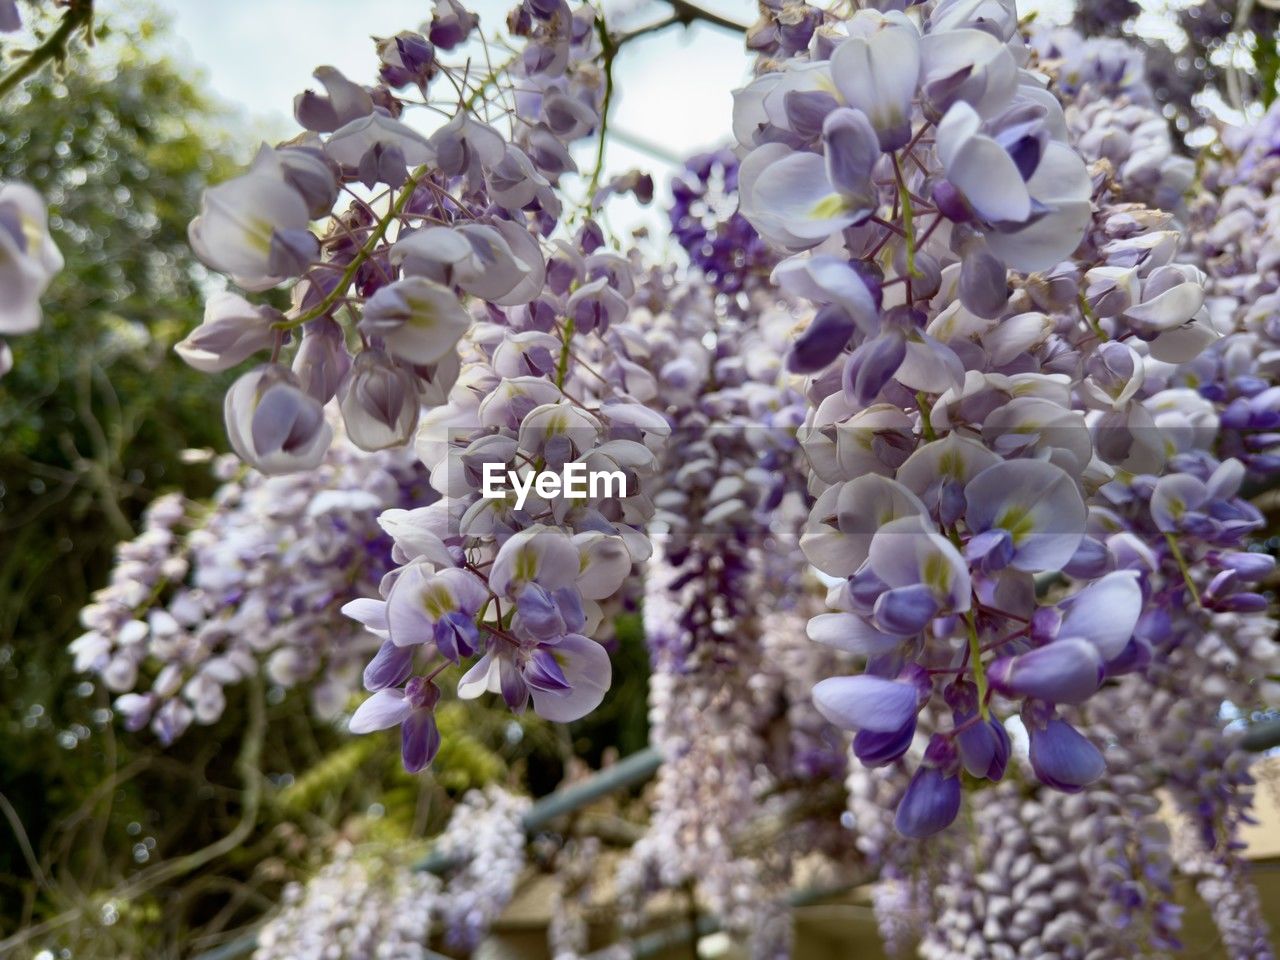 Purple chinese wisteria in bloom on vines